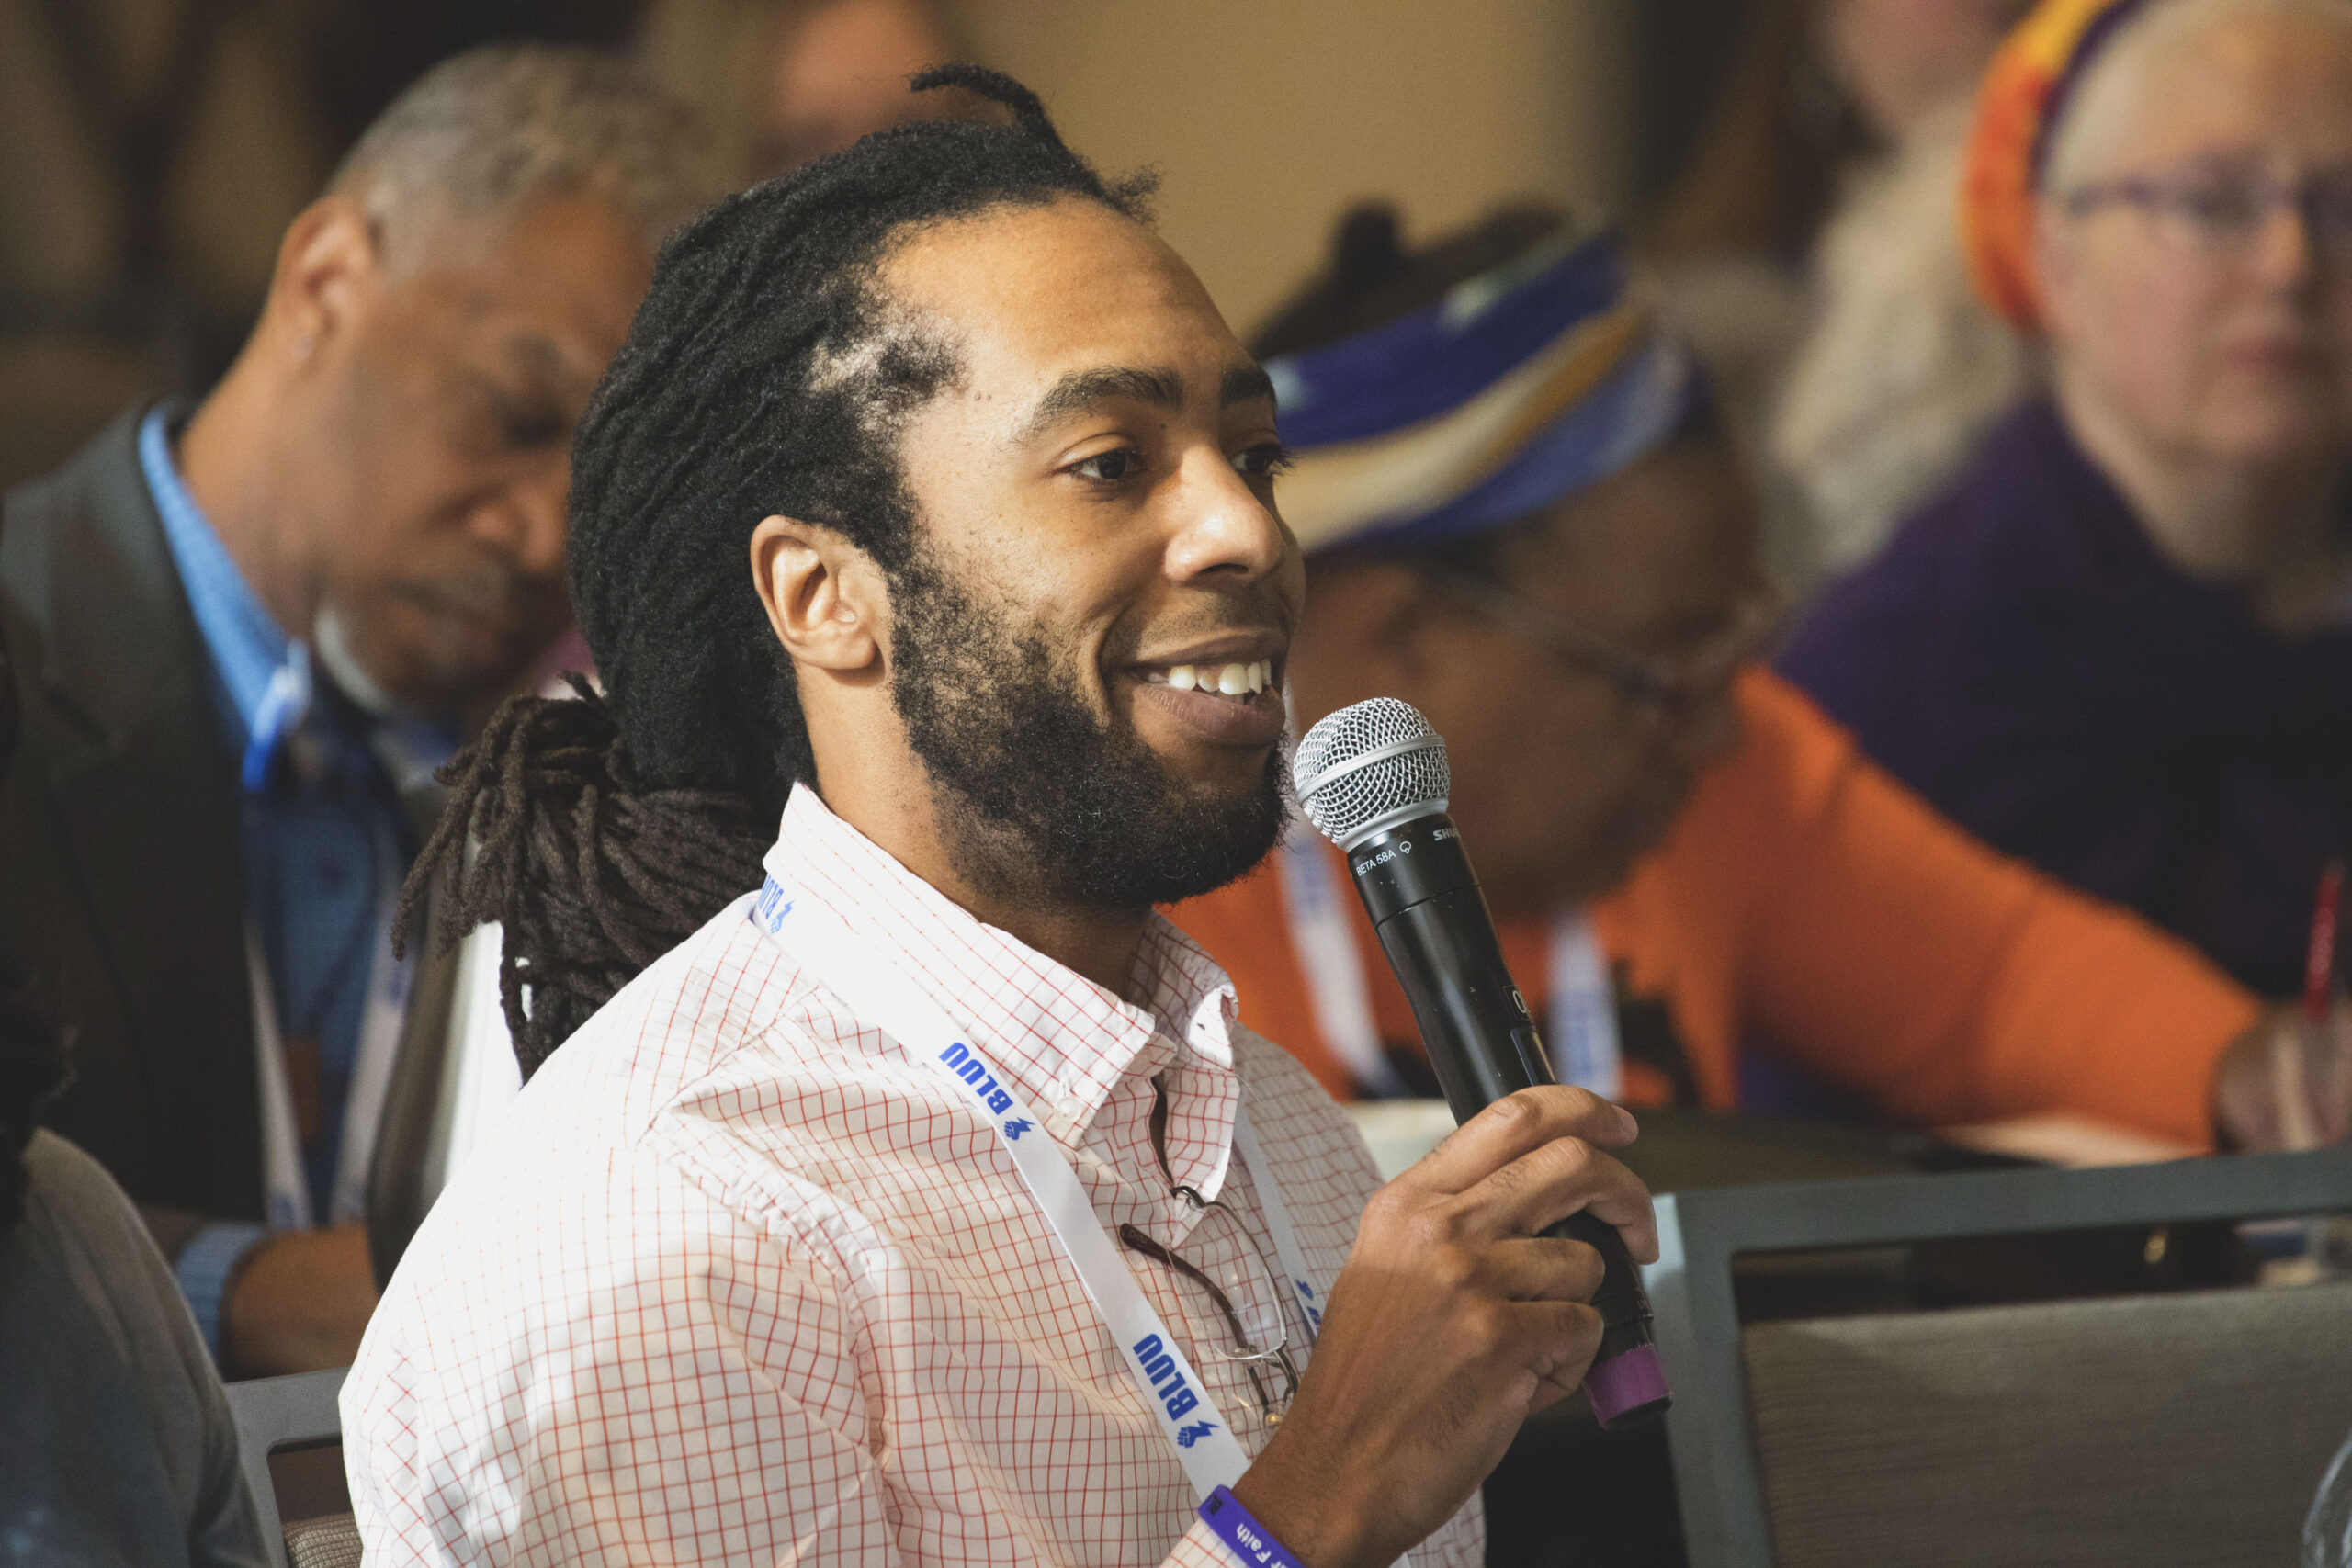 A Black man with locs holds a microphone while smiling.